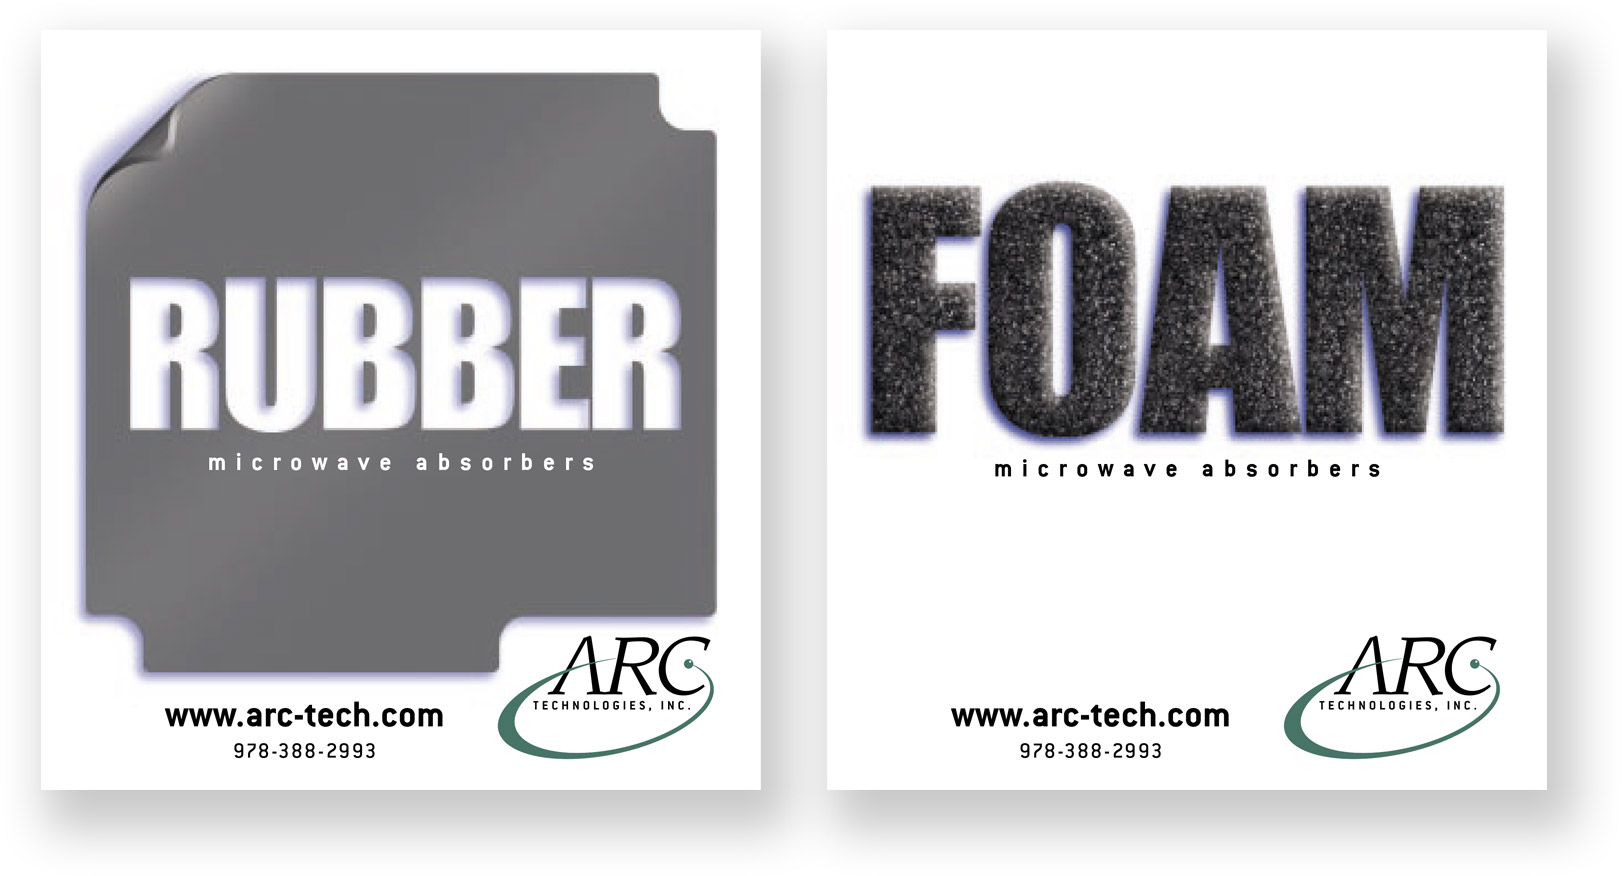 Arc Technology Advertising Created by Strand Marketing